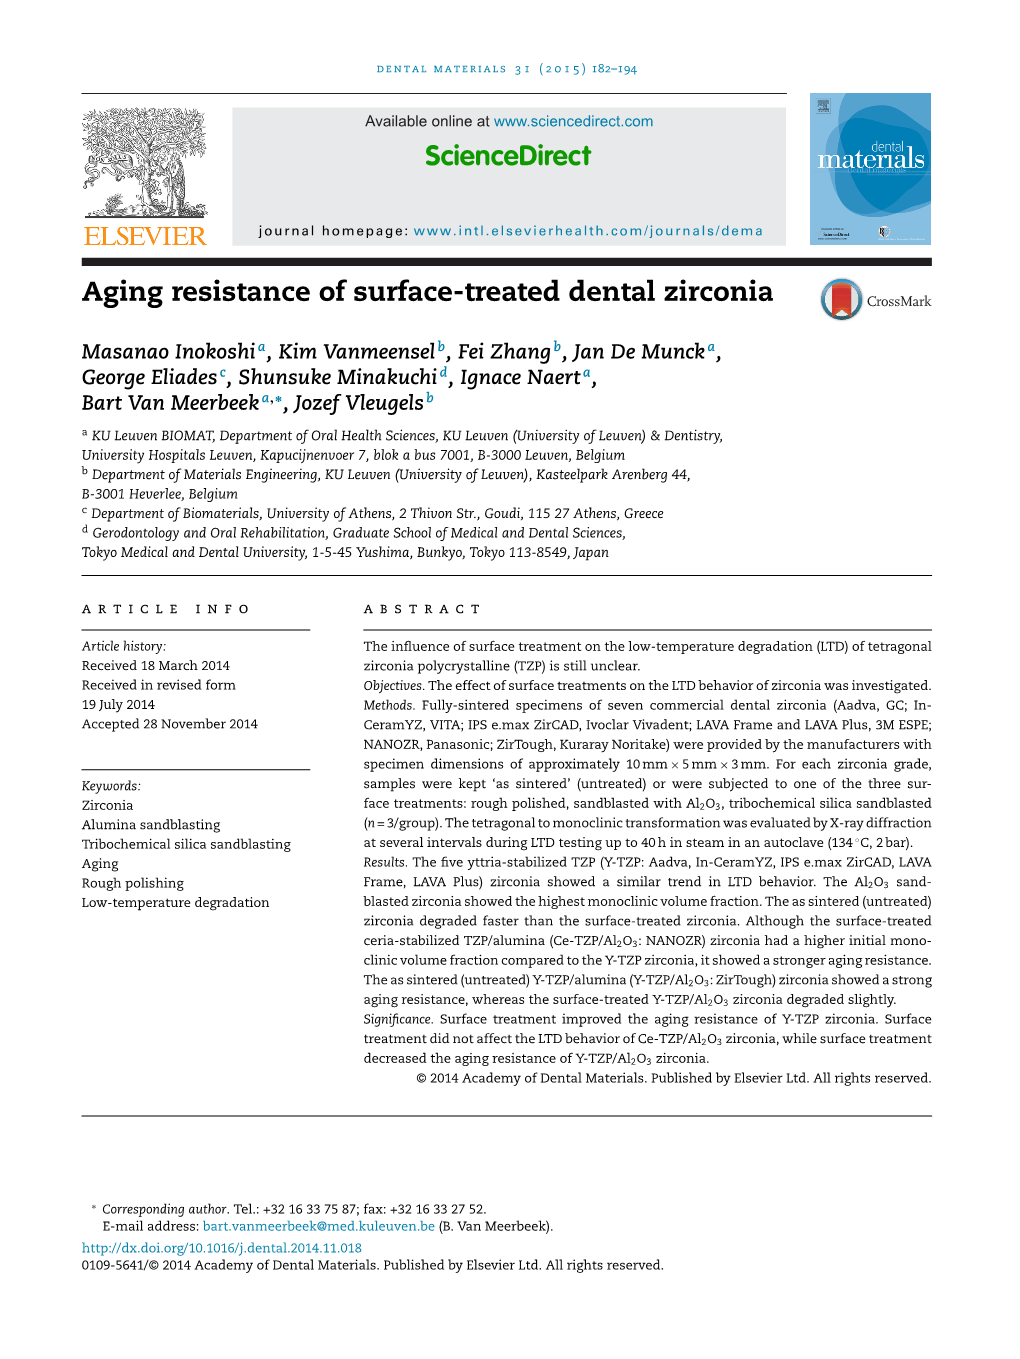 Aging Resistance of Surface-Treated Dental Zirconia